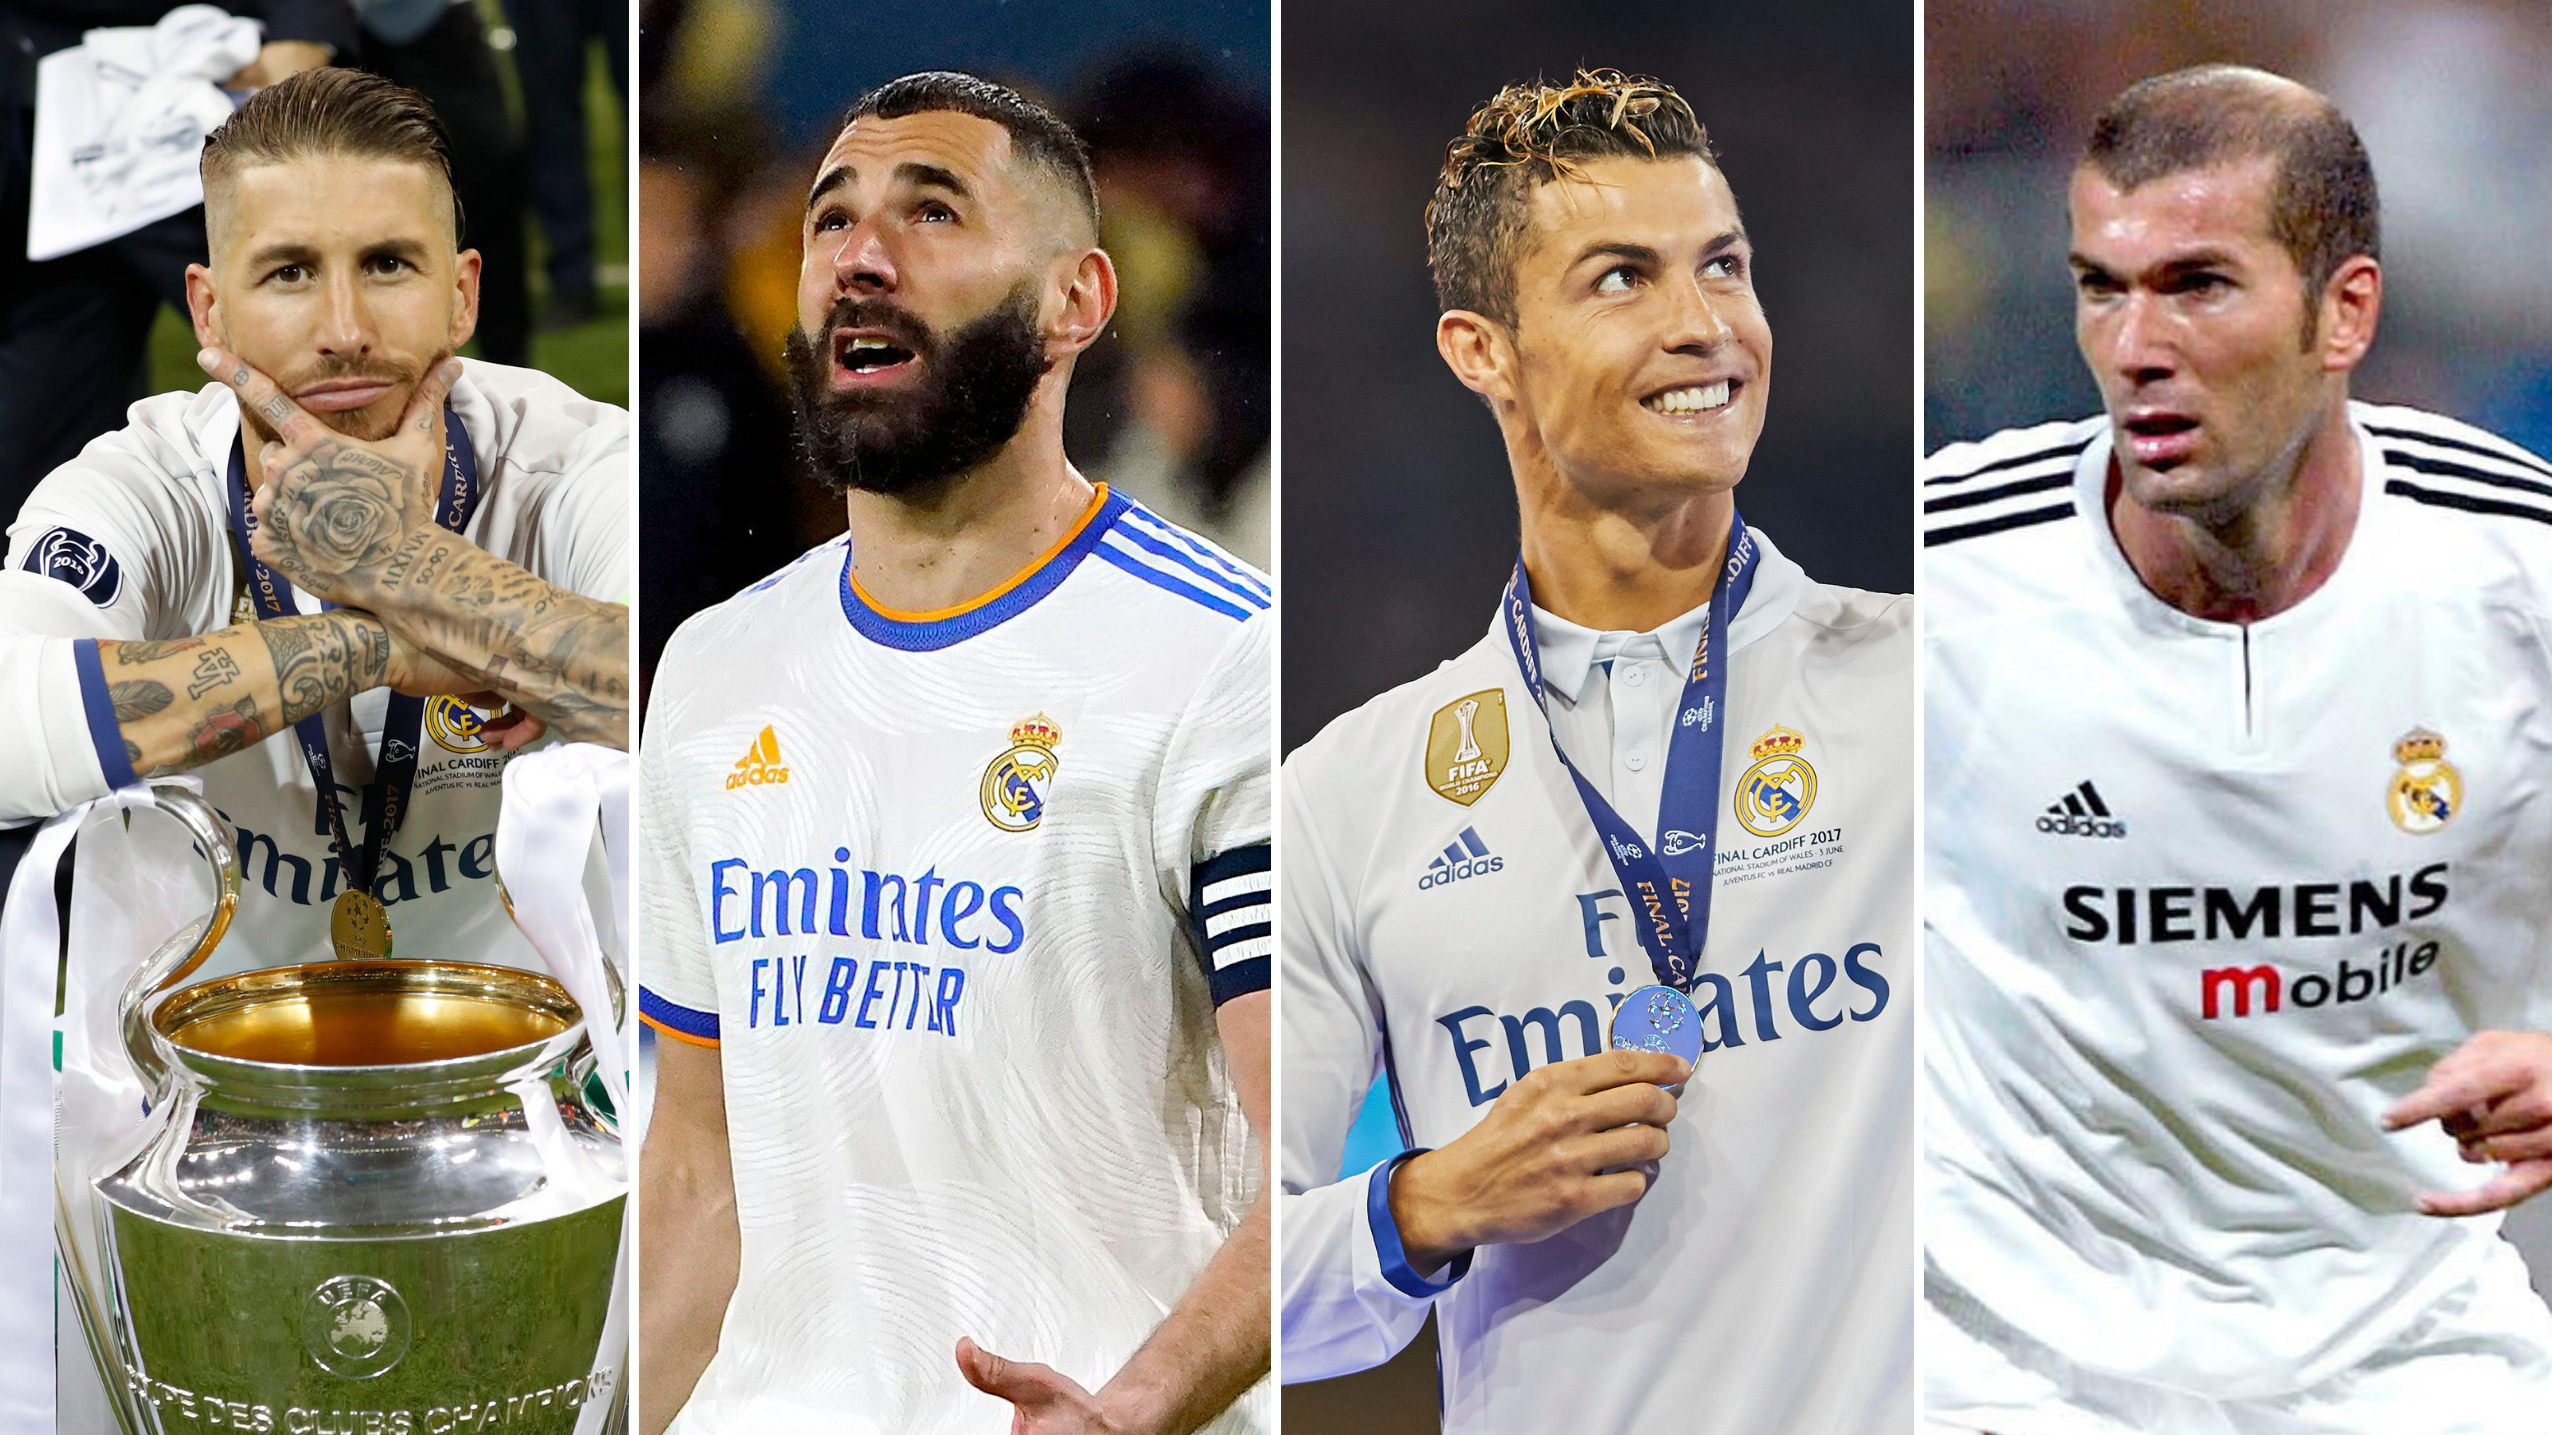 The Real Madrid Players Of All Time After Karim Benzema's Outrageous Season